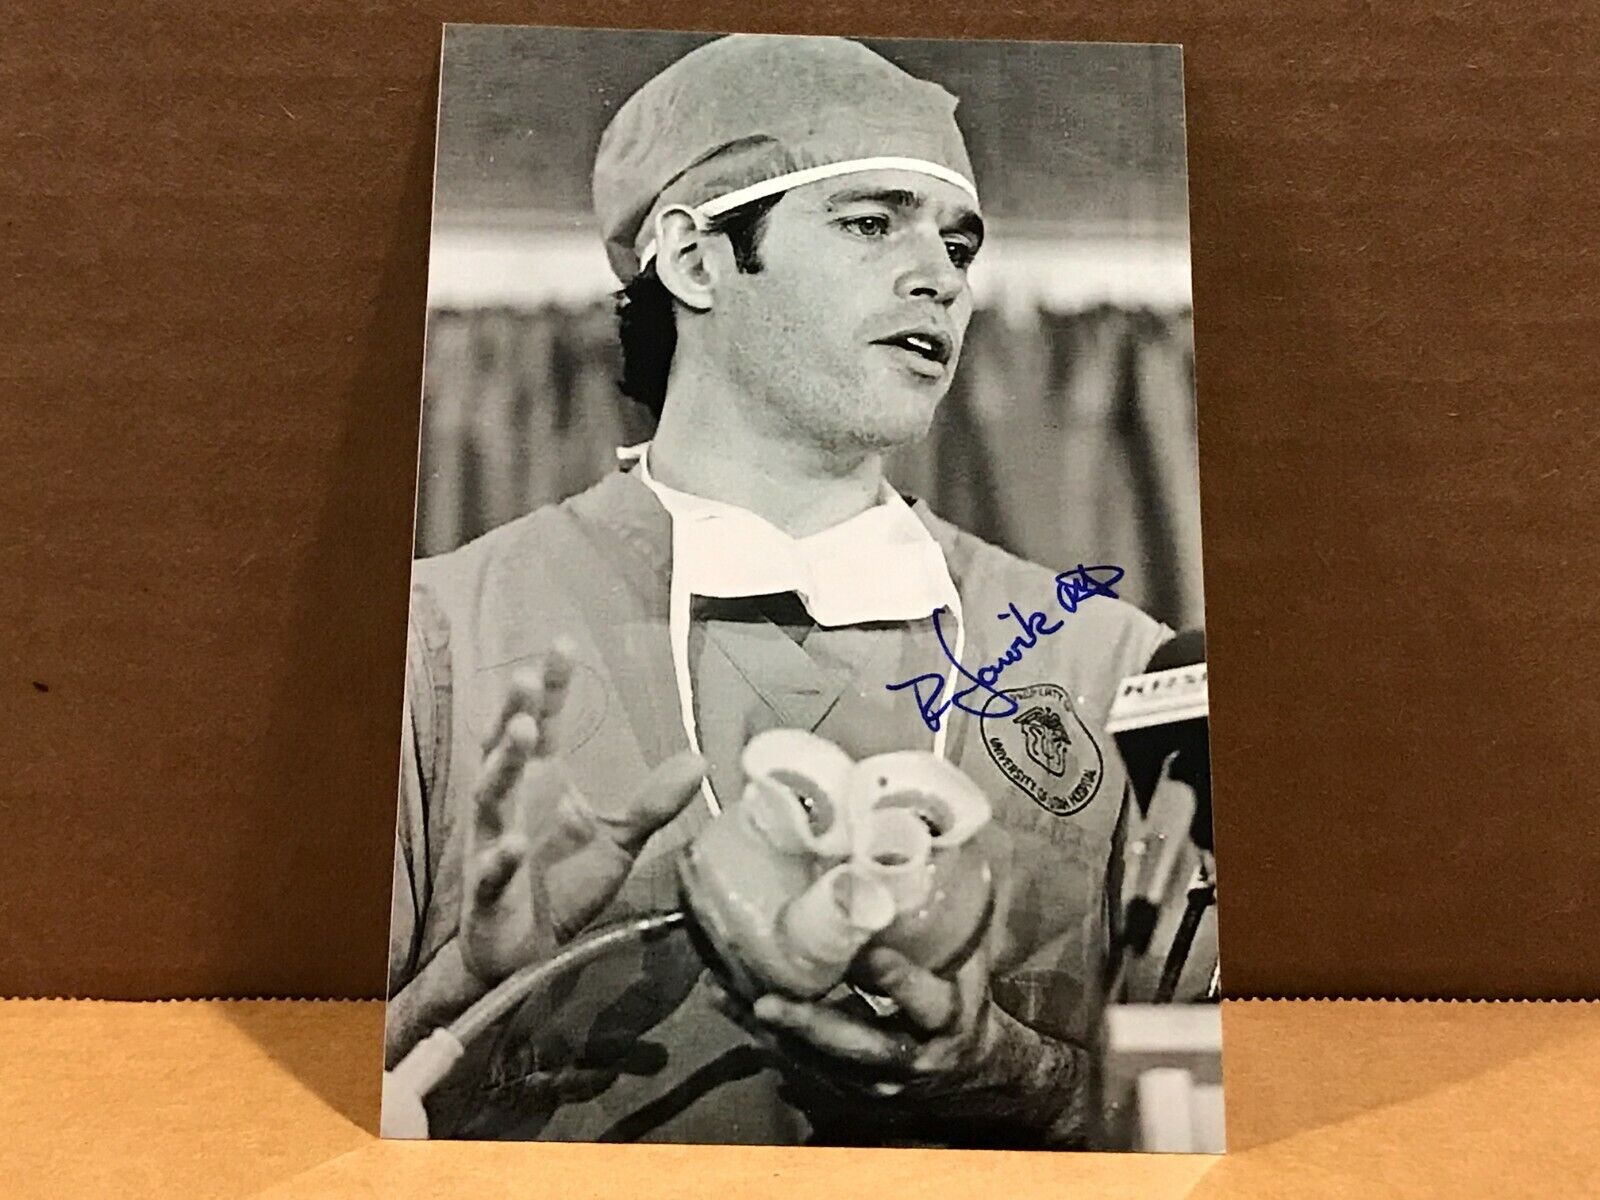 DR ROBERT JARVIK Authentic Hand Signed Autograph 4x6 Photo - ARTIFICIAL HEART